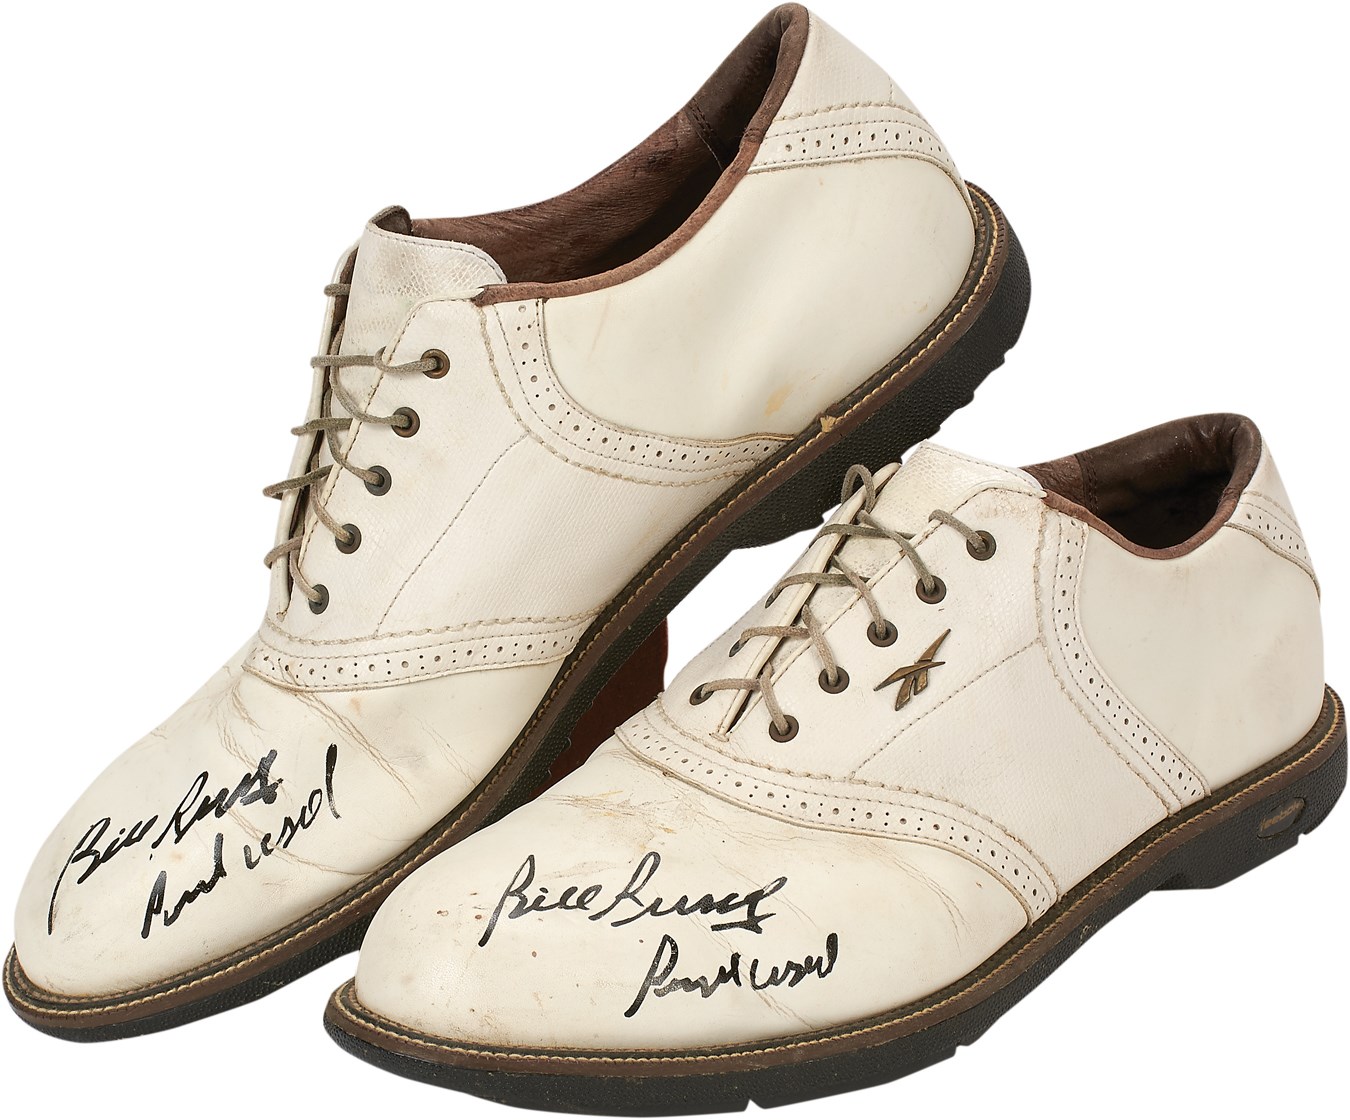 Basketball - Bill Russell Signed & Used Golf Shoes with Russell Signed LOA